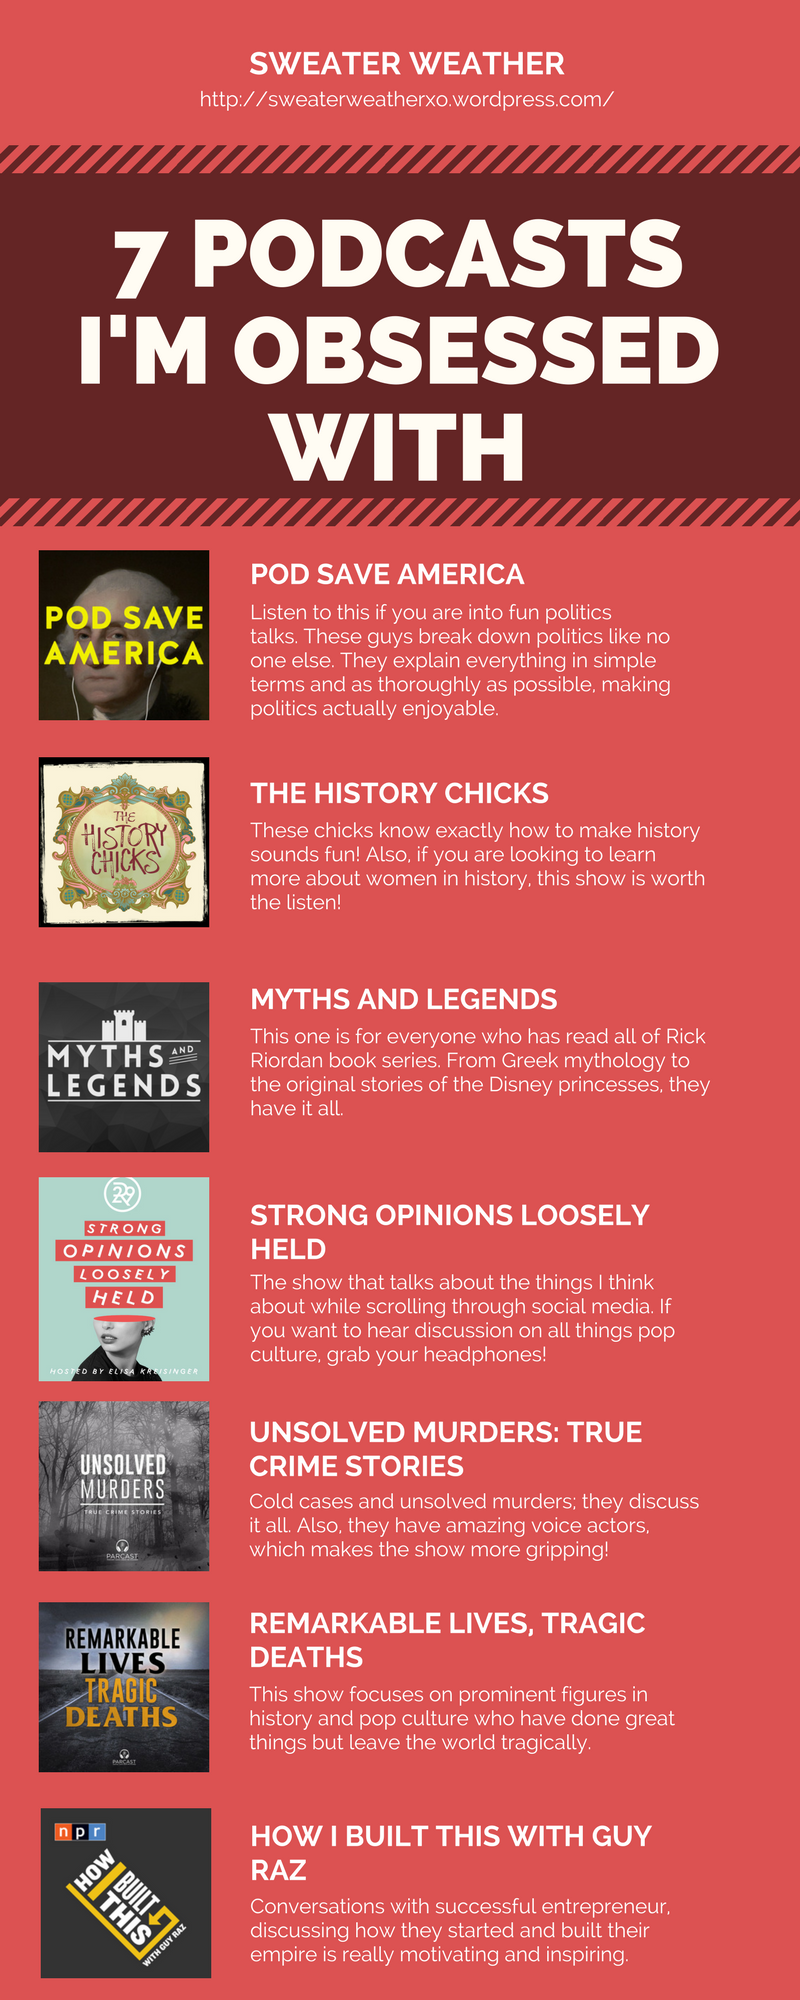 podcast shows; pod save america, the history chicks, myths and legends, strong opinions loosely held, unsolved murders: true crime stories, remarkable lives tragic deaths, how i built this with guy raz